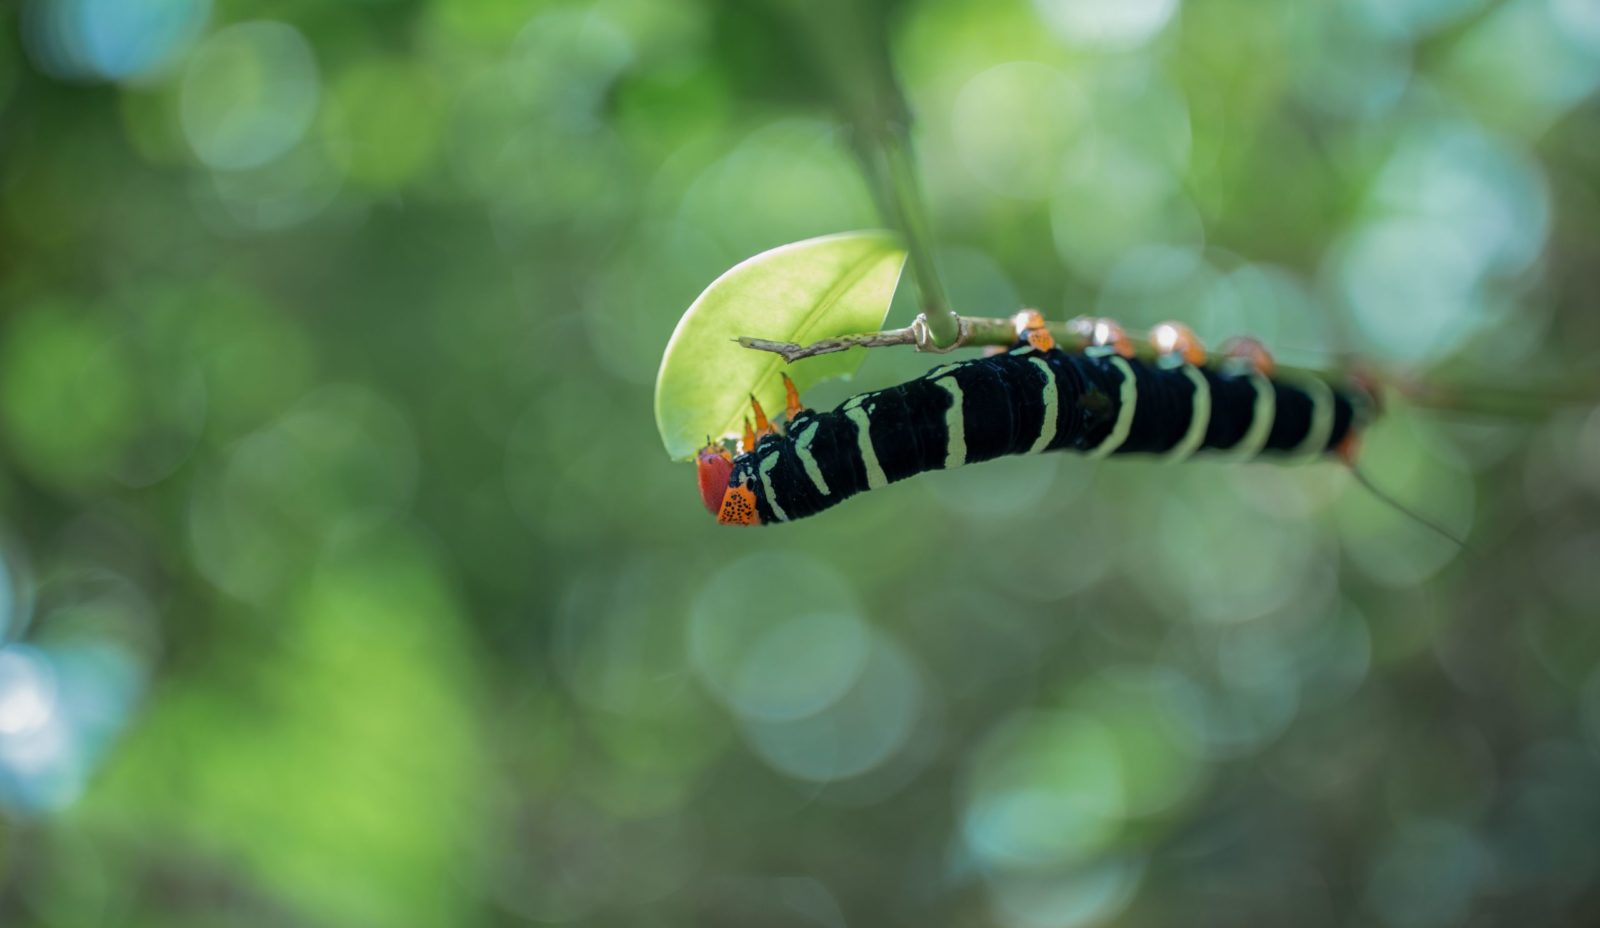 A black and yellow striped caterpillar munching a leave in the garden at Cosmos St Lucia, aganist a blurred background of green leaves